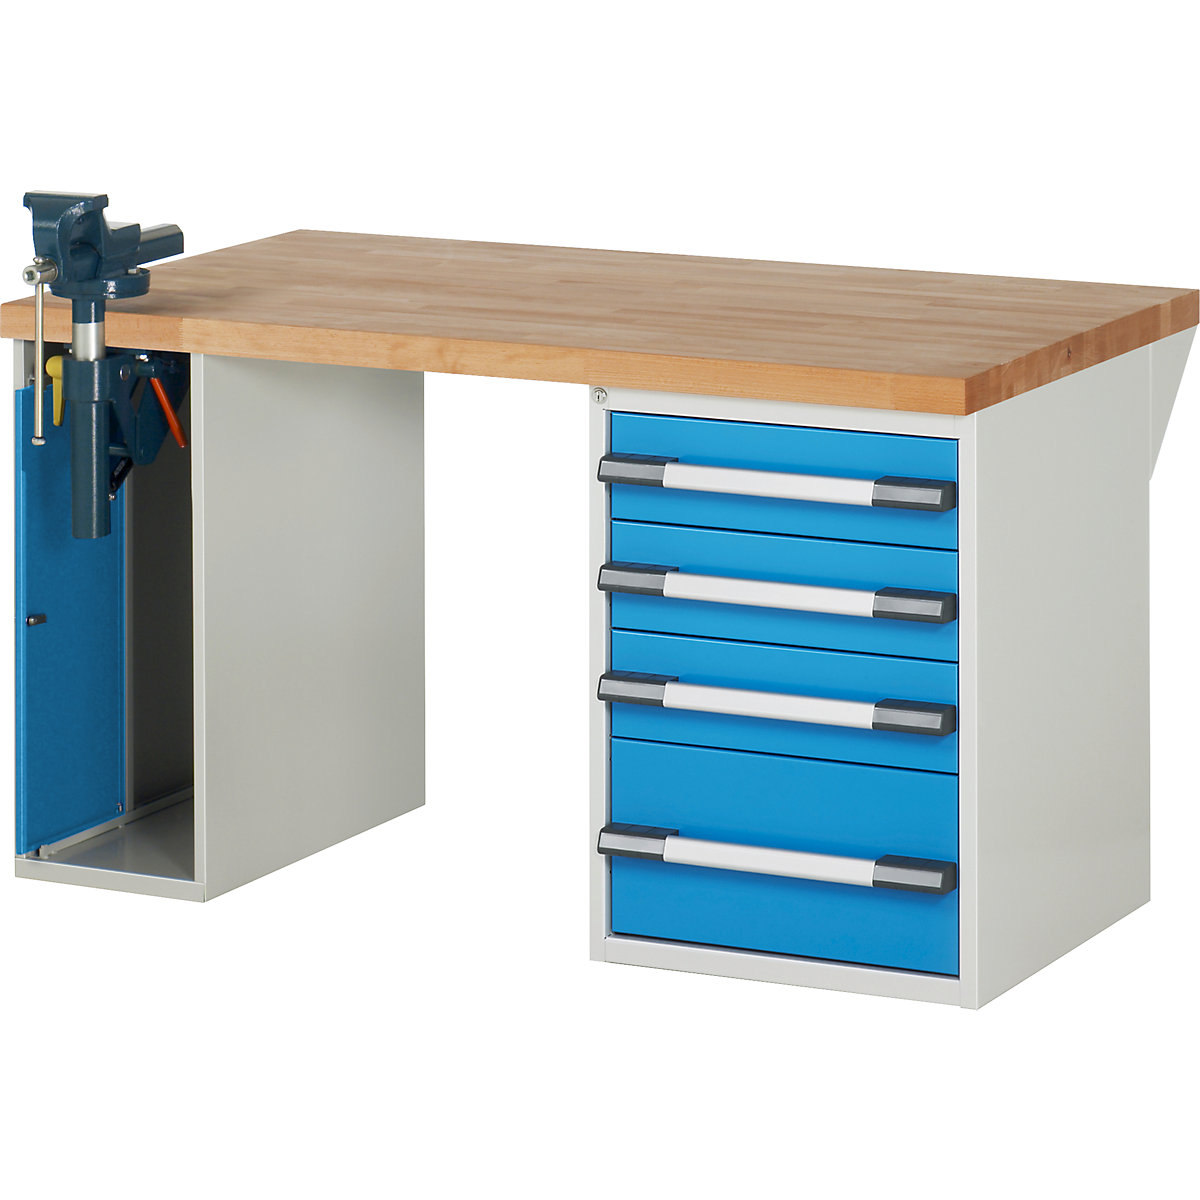 Workbench, Series 7 modular system – eurokraft pro, 1 cupboard, 1 fixed pedestal with 4 drawers, WxD 1500 x 900 mm-4